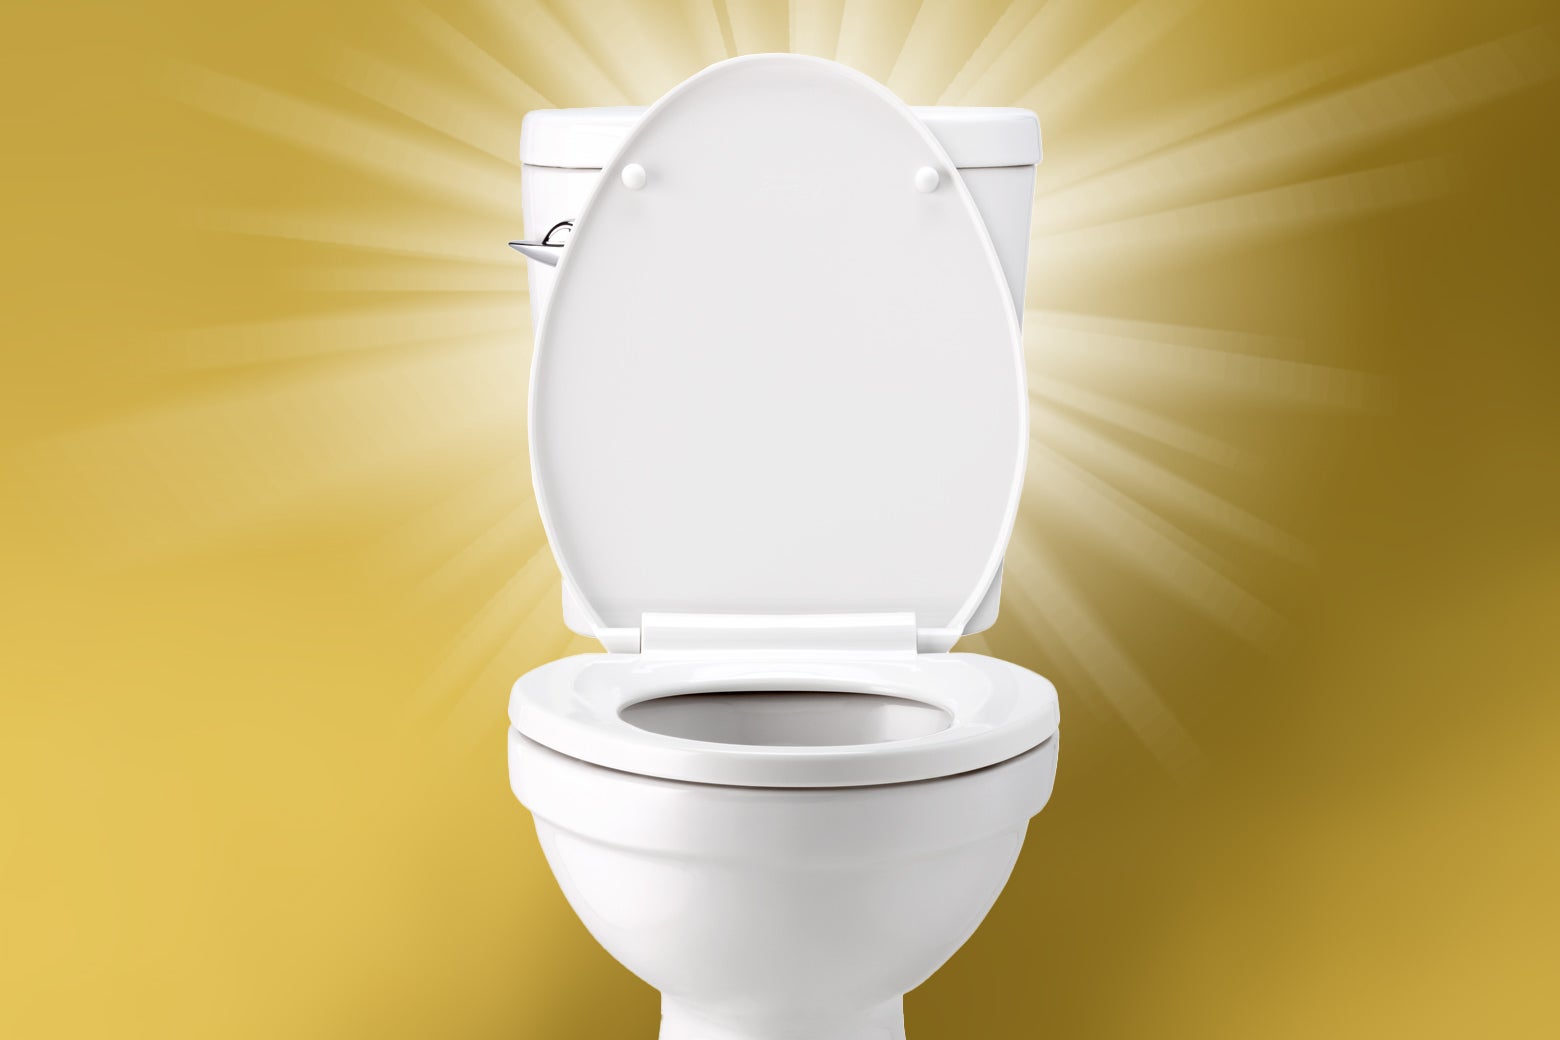 A toilet emitting a heavenly light.